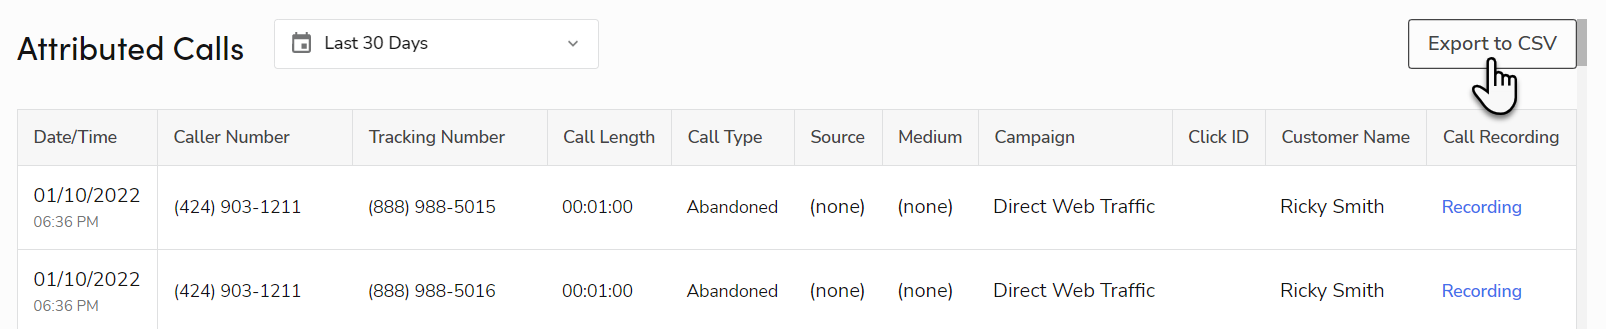 Click Export CSV to download the information in XSLX format in Attributed Calls section